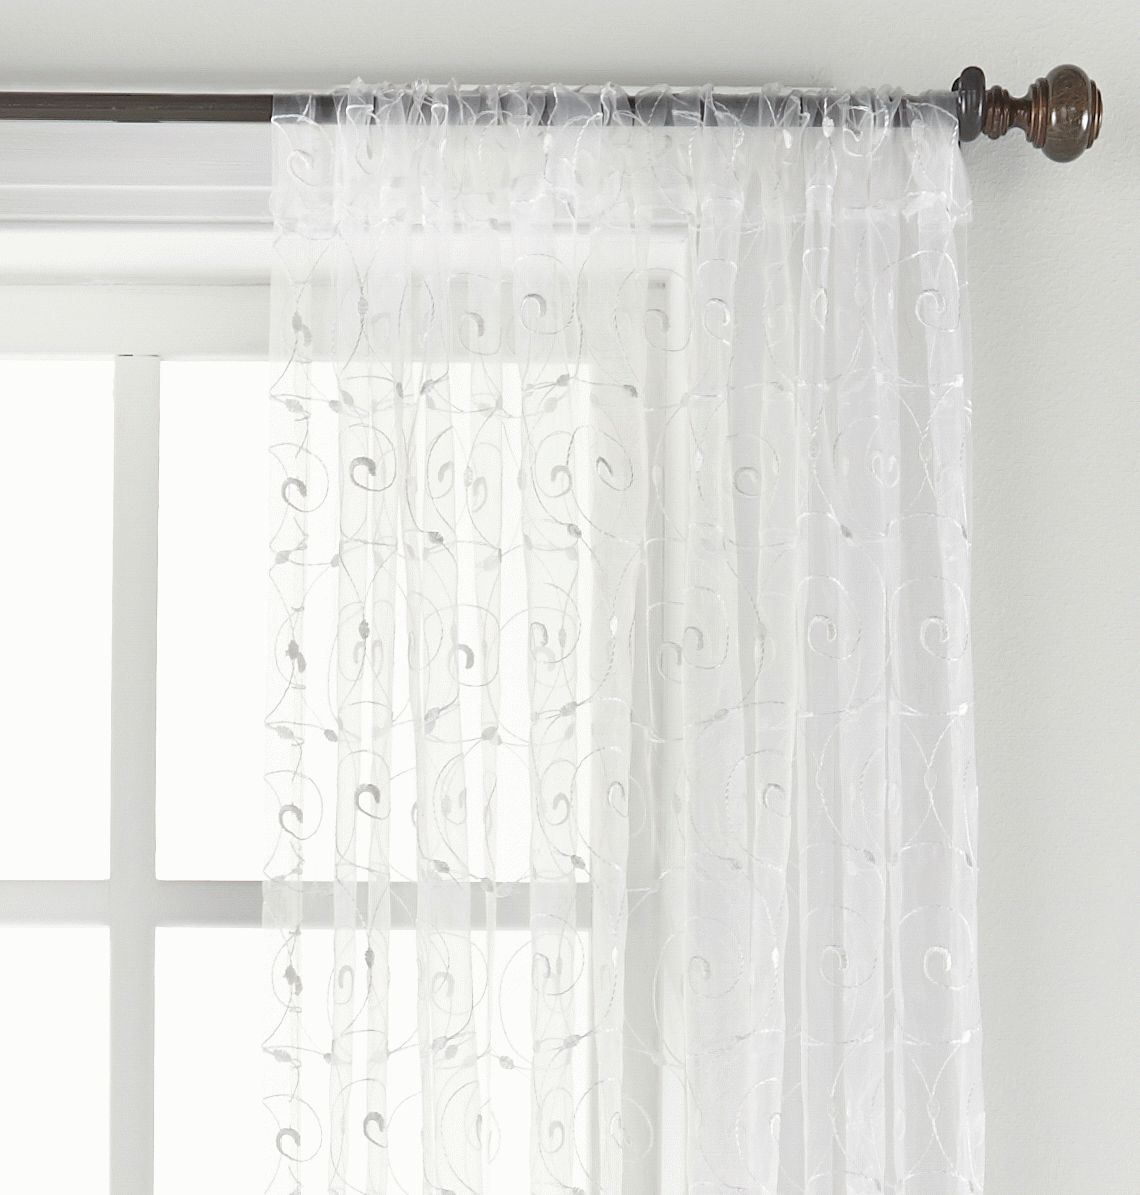 Sheer Drapes And Curtains – Gossamer Embroidered Sheer Inside Fashionable Kida Embroidered Sheer Curtain Panels (View 11 of 20)